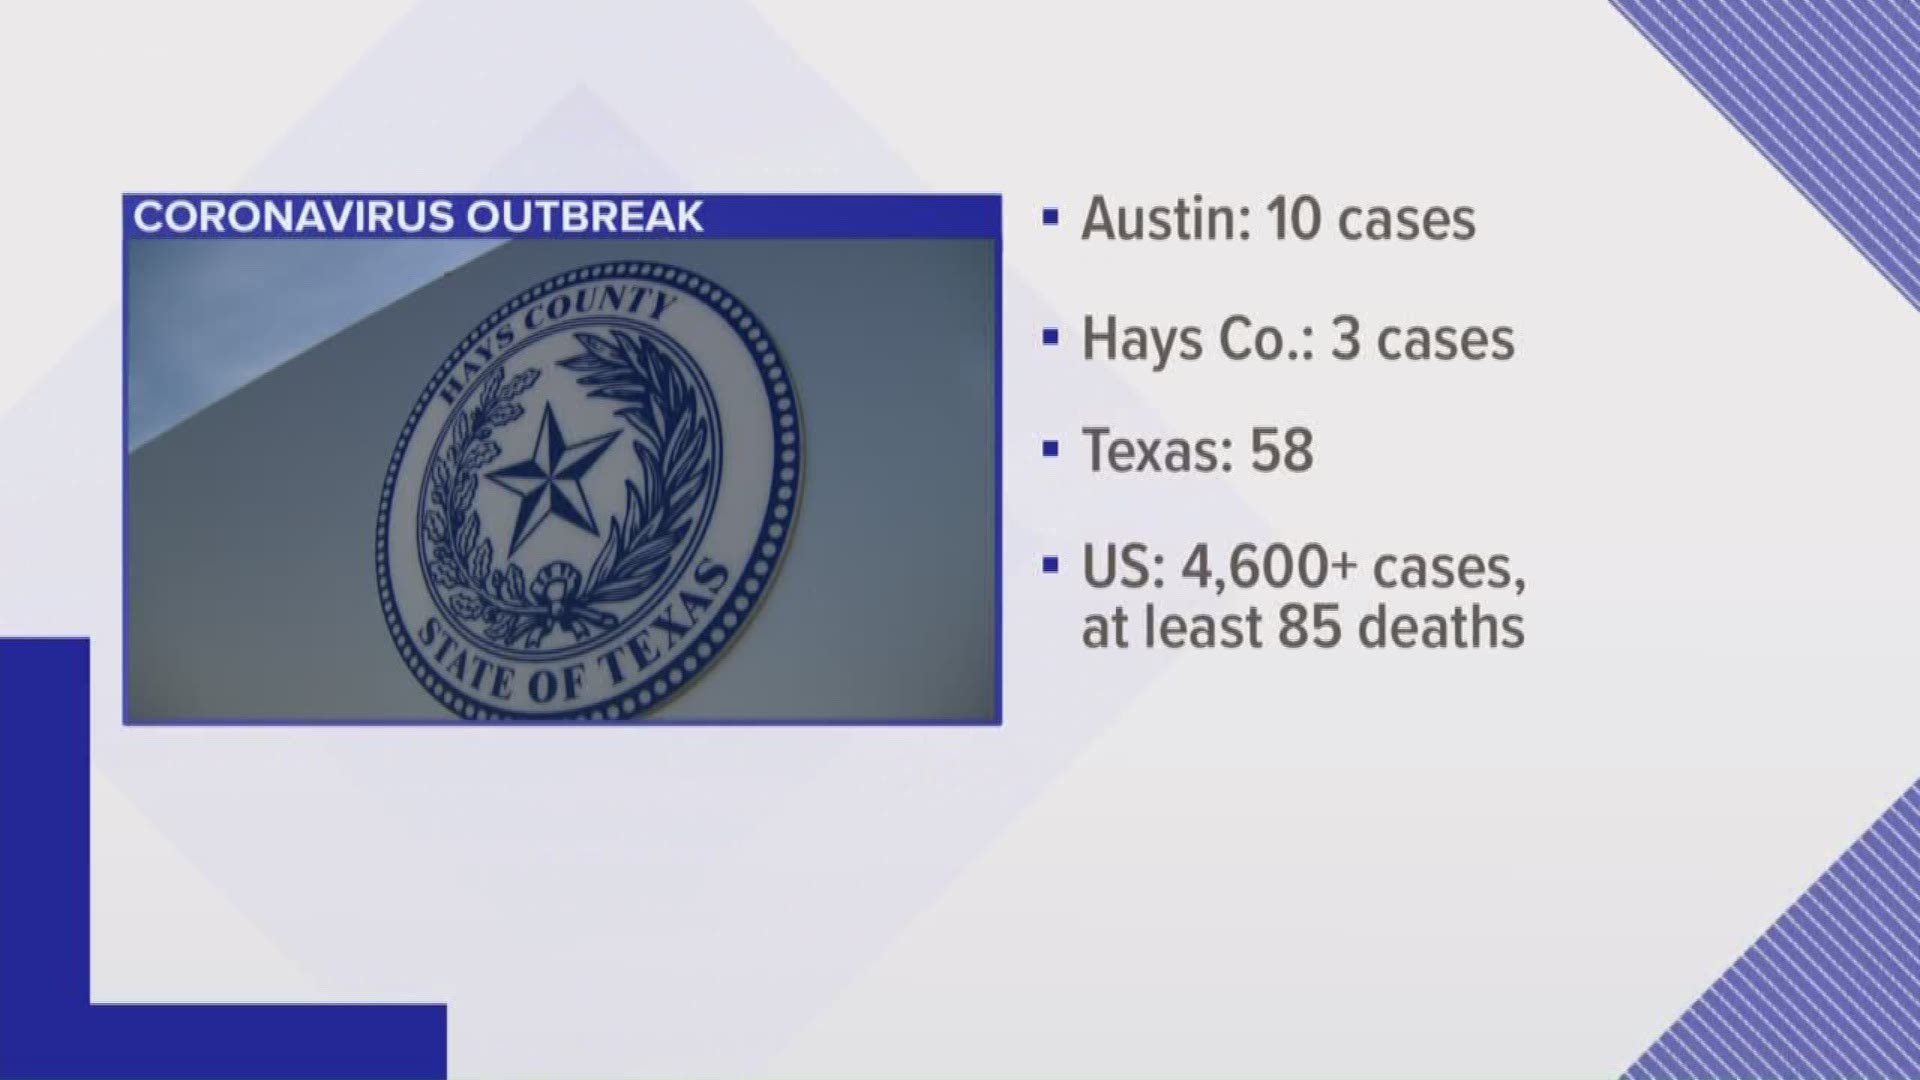 In the Austin area, there are 10 confirmed cases of coronavirus.